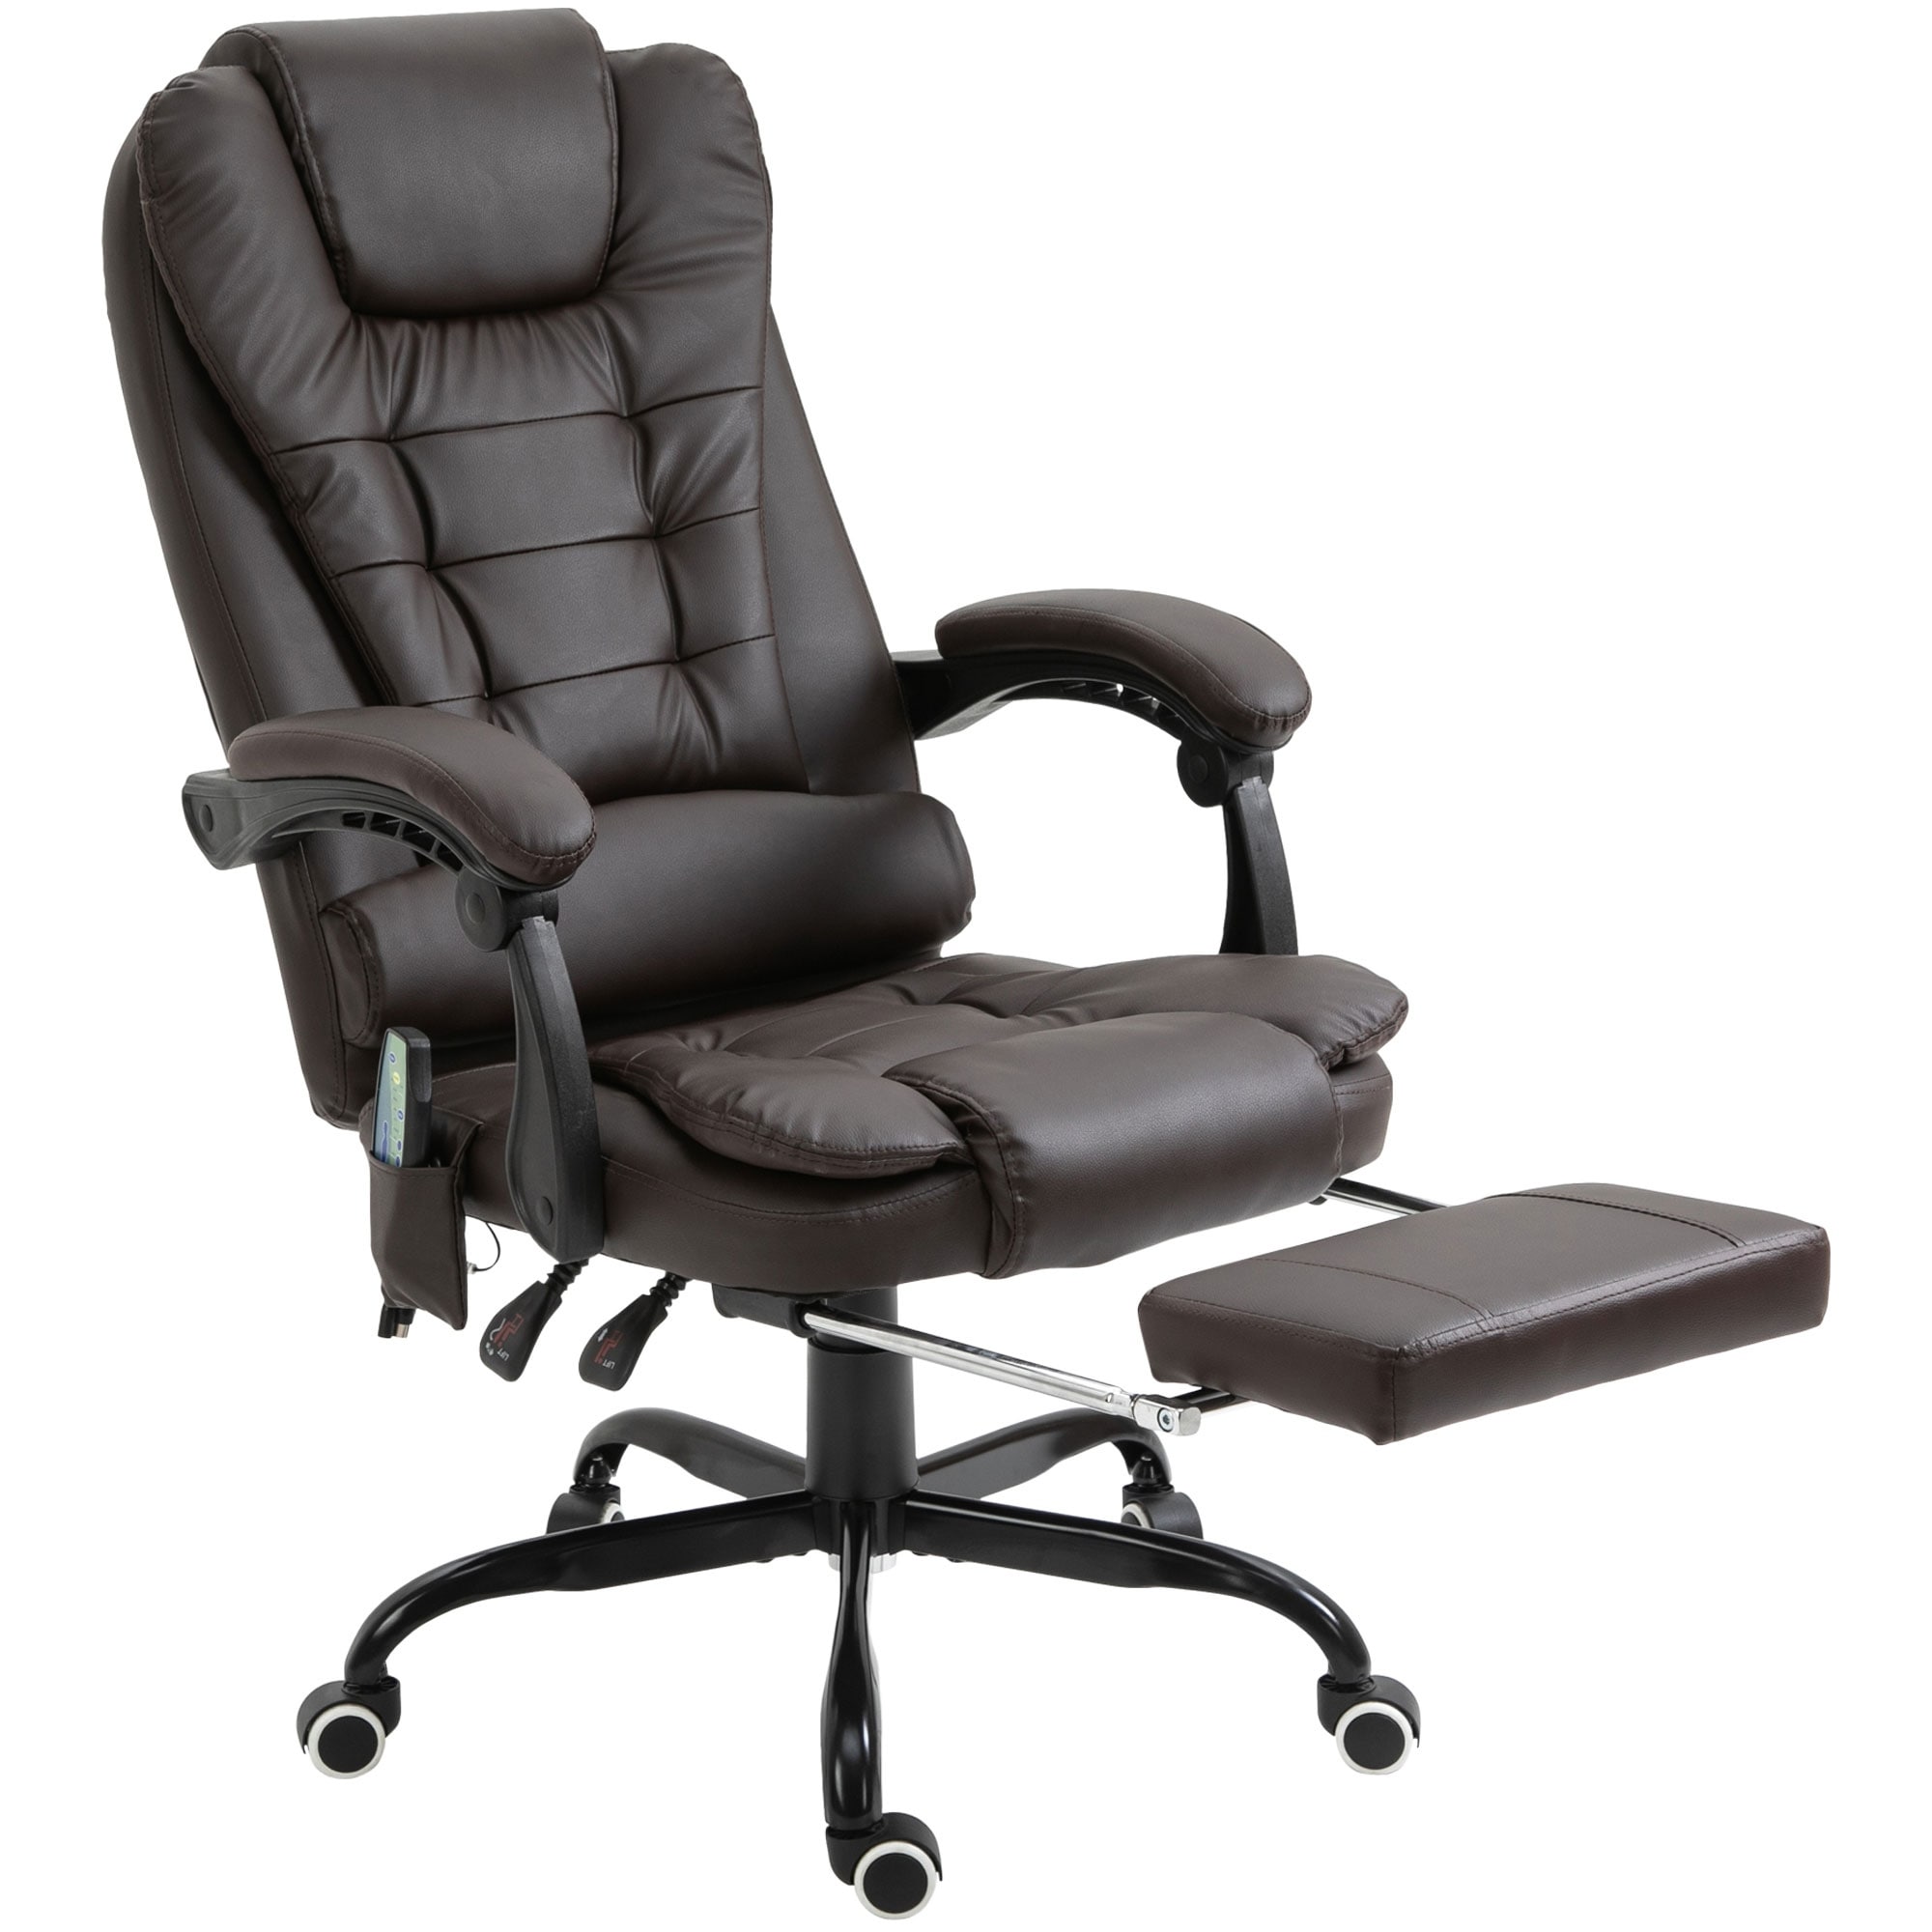 https://ak1.ostkcdn.com/images/products/is/images/direct/bfe1c7ccc30e4273510254c9958c19cf648aebfe/Vinsetto-7-Point-Vibrating-Massage-Office-Chair-High-Back-Executive-Recliner-with-Lumbar-Support%2C-Footrest%2C-Reclining-Back.jpg